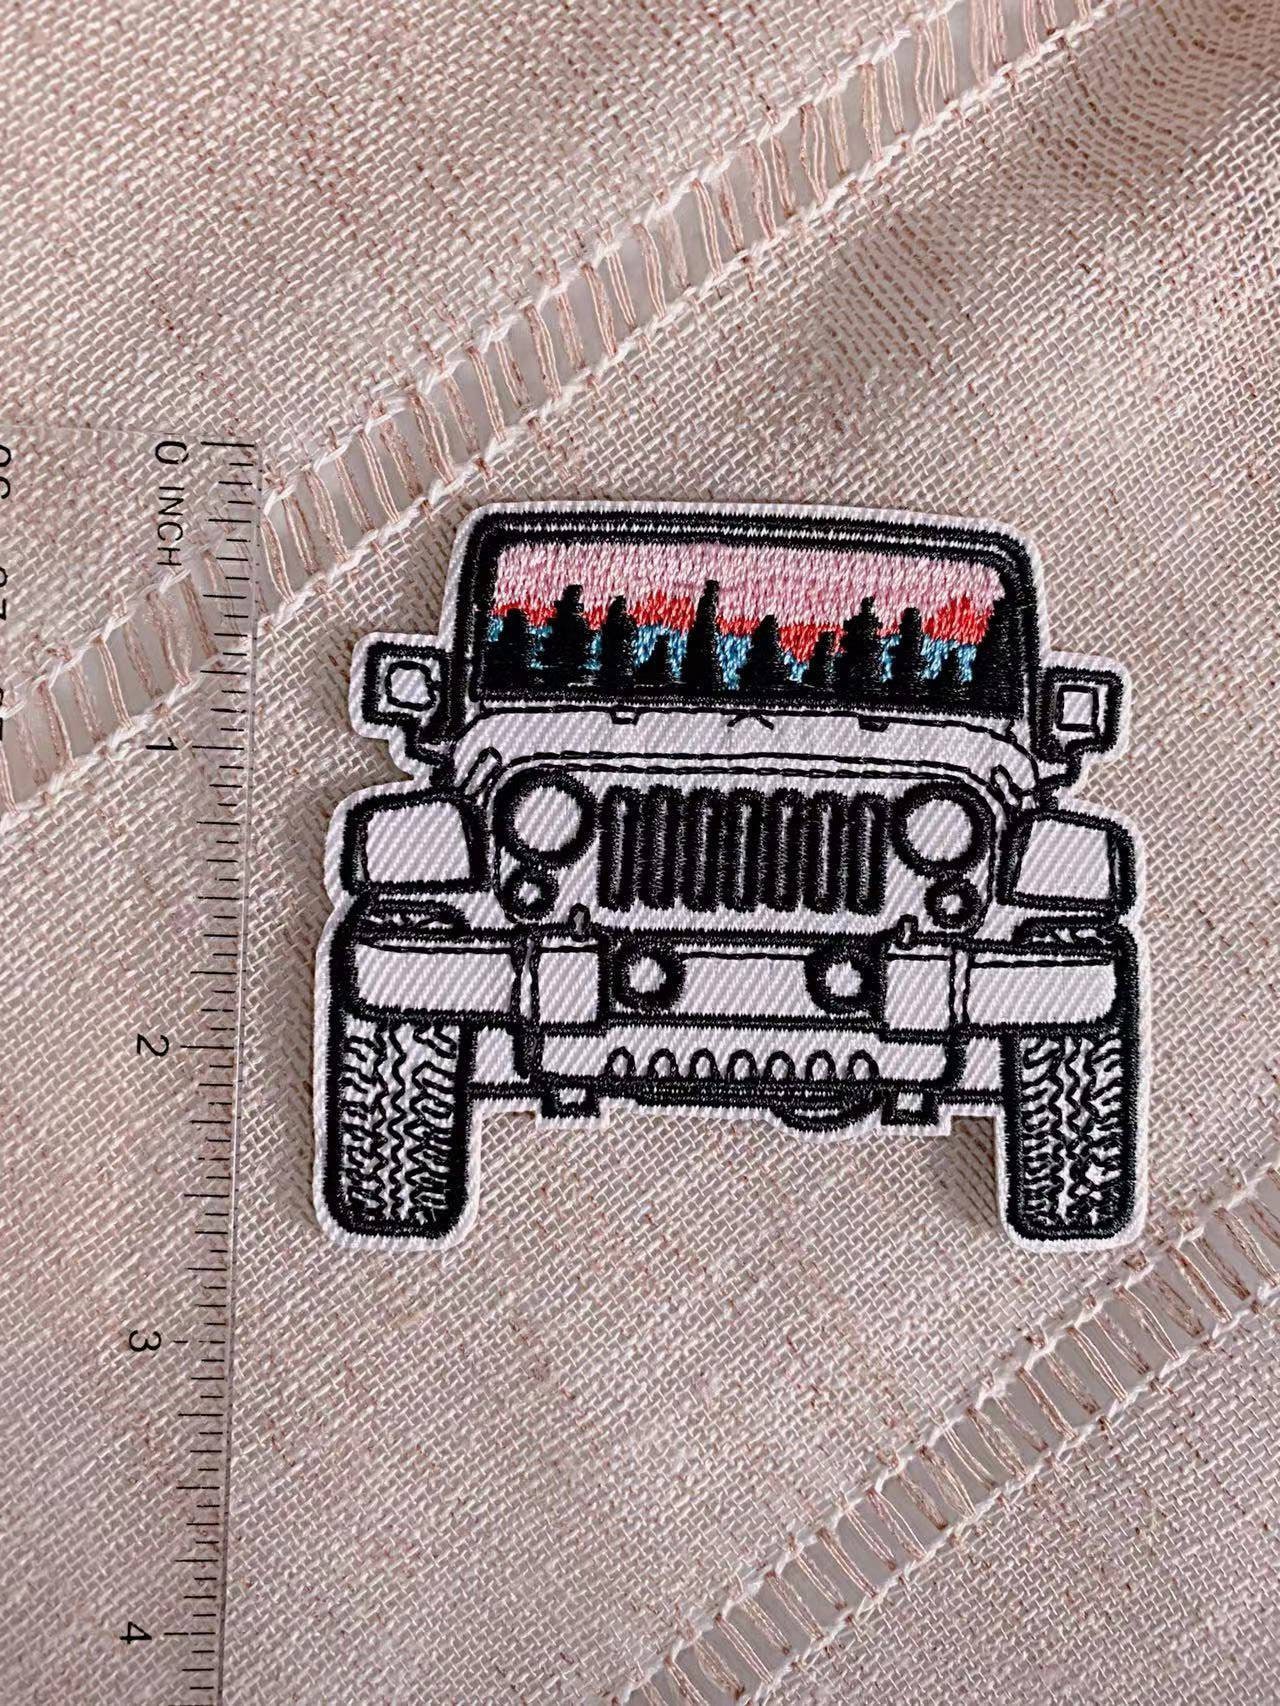 JEEP 4 x 4 EMBROIDERED PATCH ~3-1/2"x 3" OFF ROAD CHEROKEE JEEPSTER WRANGLER CAR 